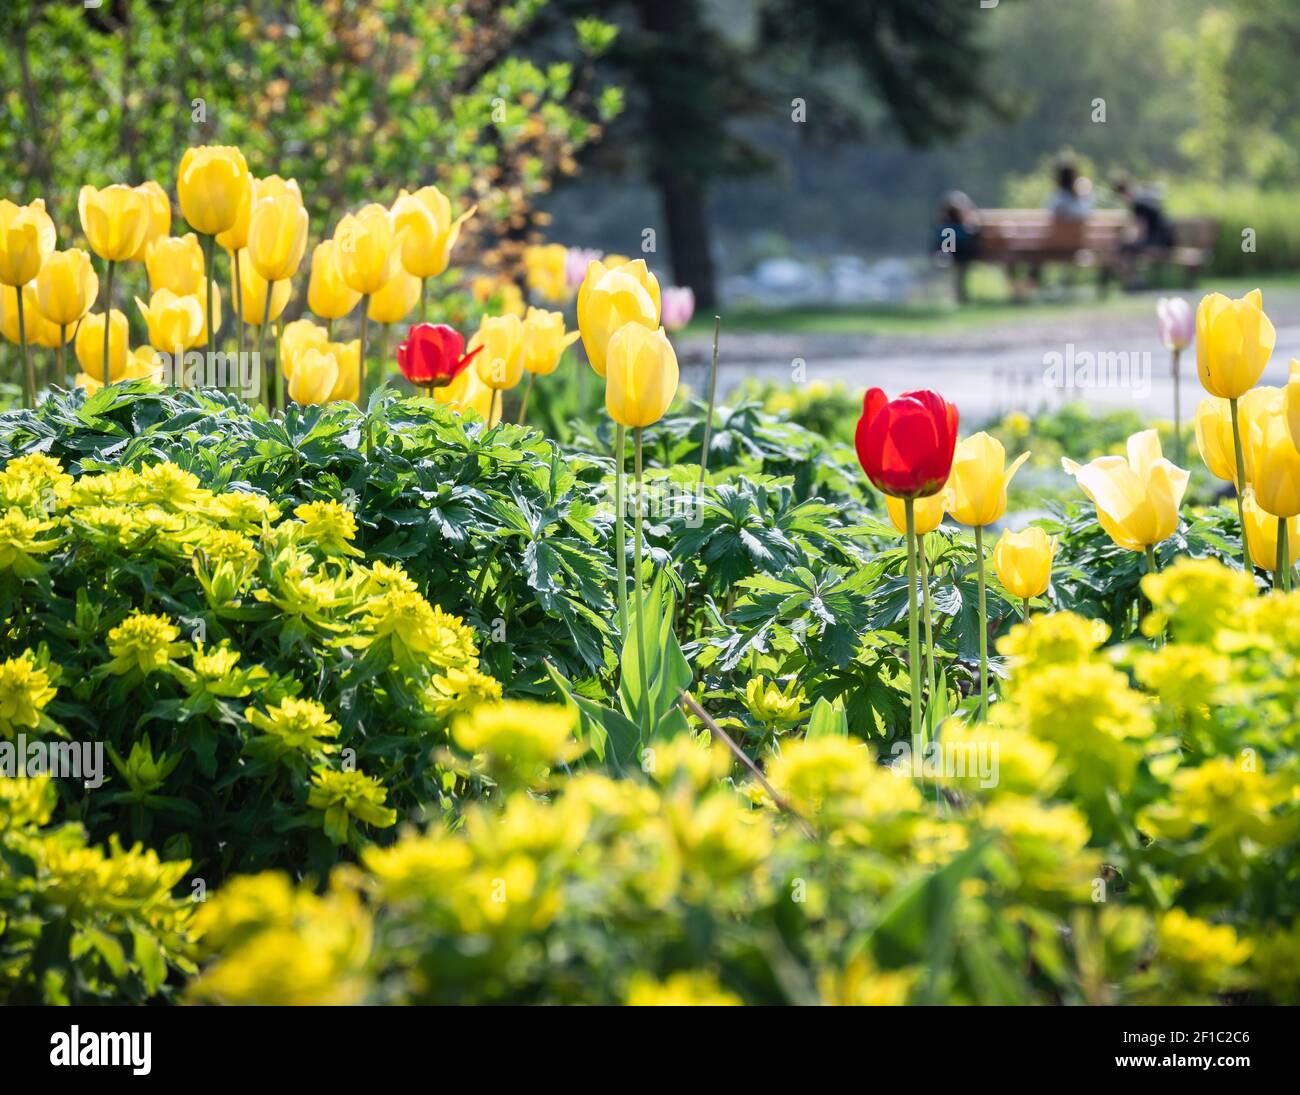 Blurred man in background proposing woman in park surrounded by flowers, red and yellow tulips in foreground Stock Photo